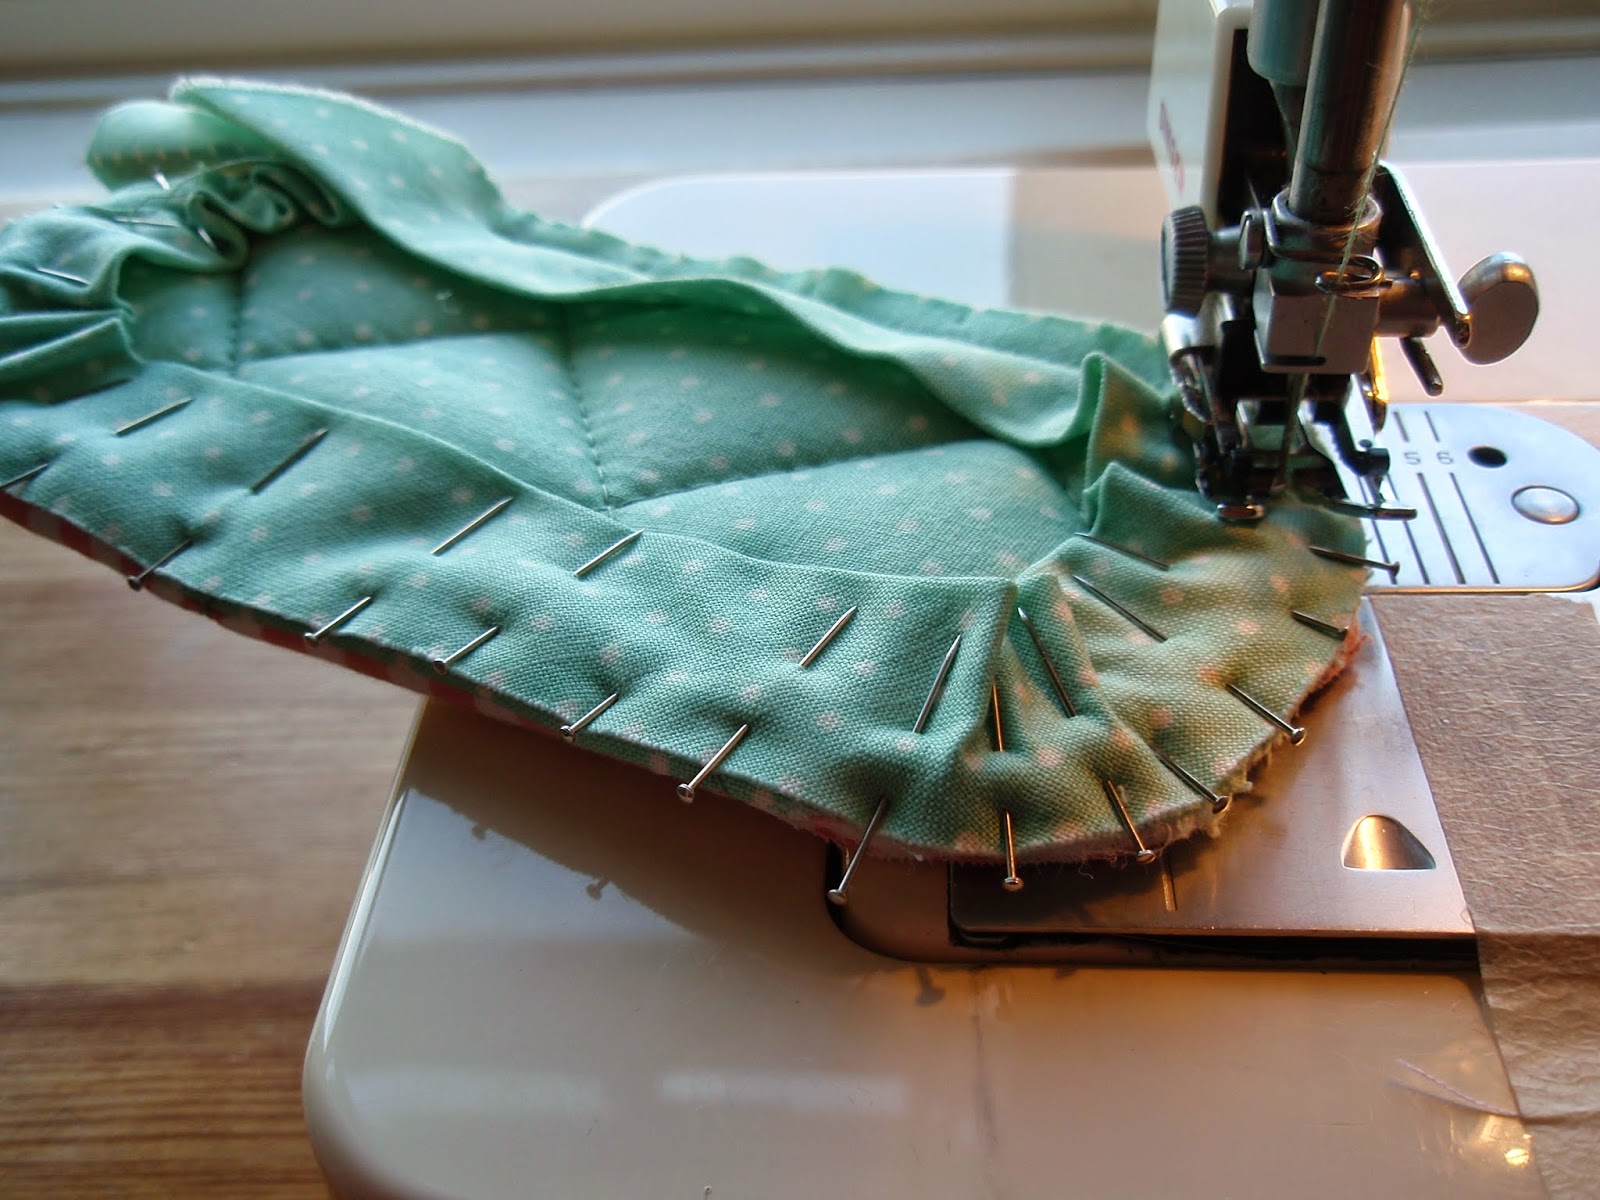 Breaking the sewing rules!